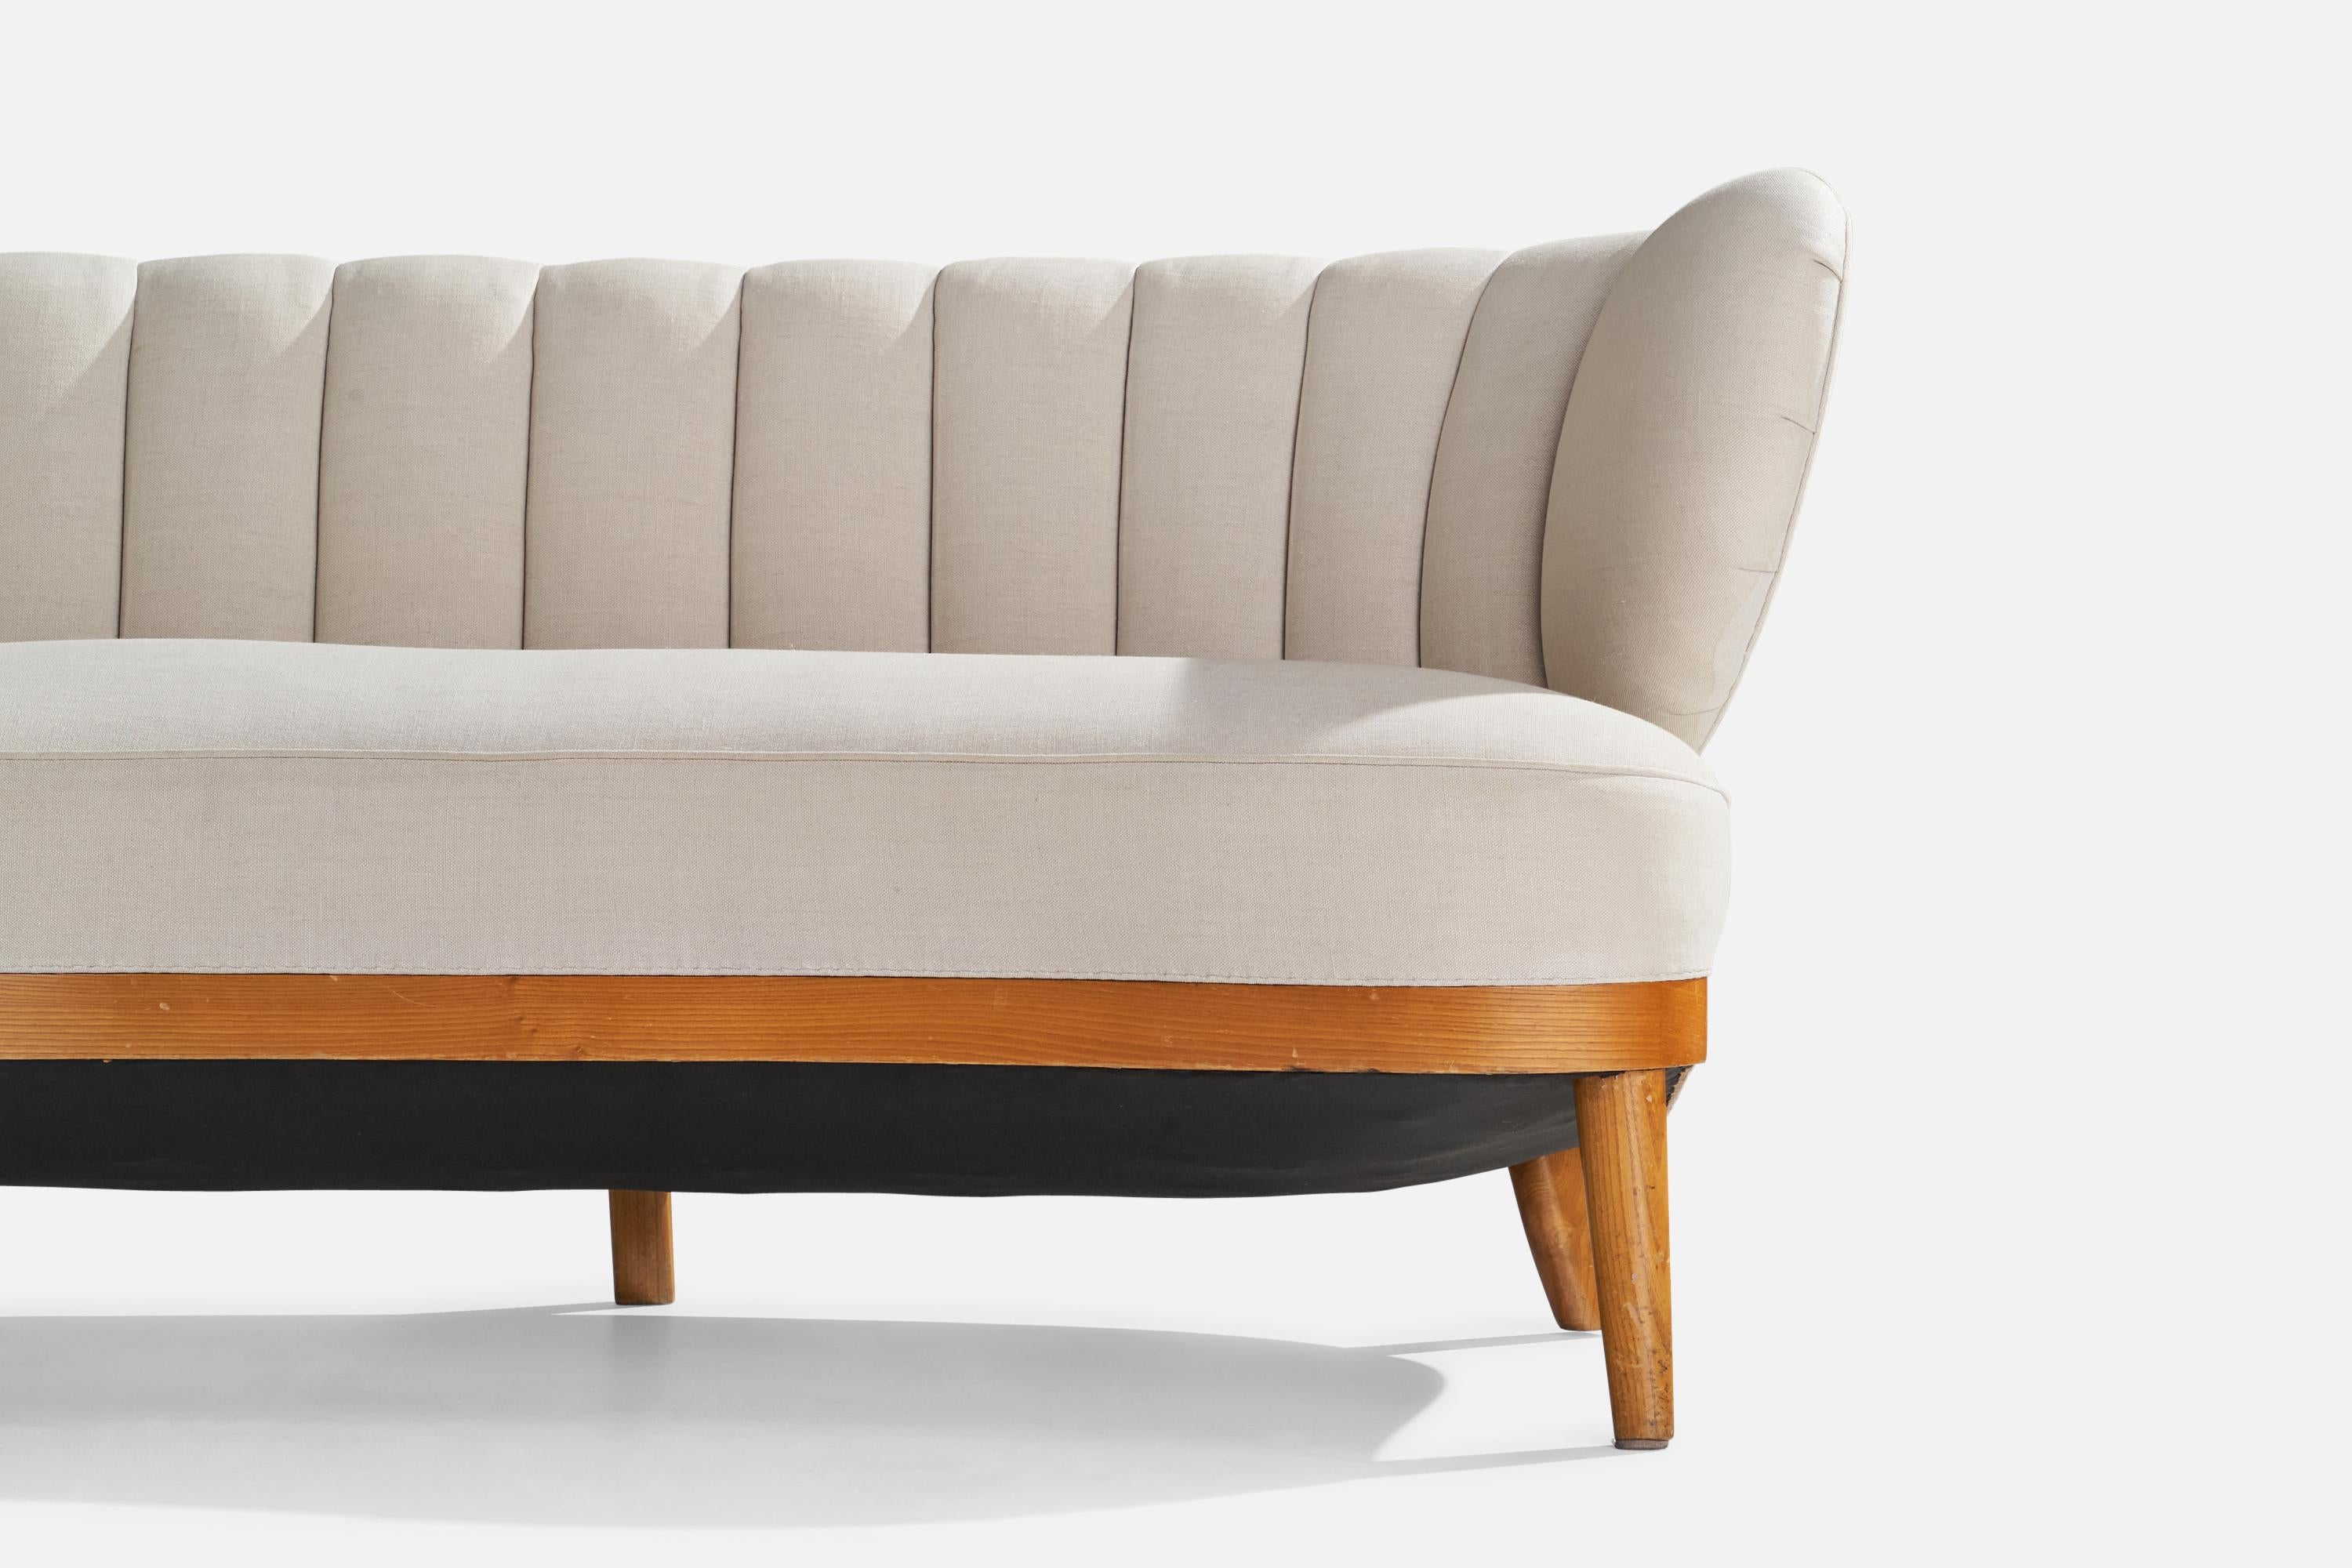 Mid-20th Century Otto Schultz, Settee, Elm, Fabric, Sweden, 1940s For Sale